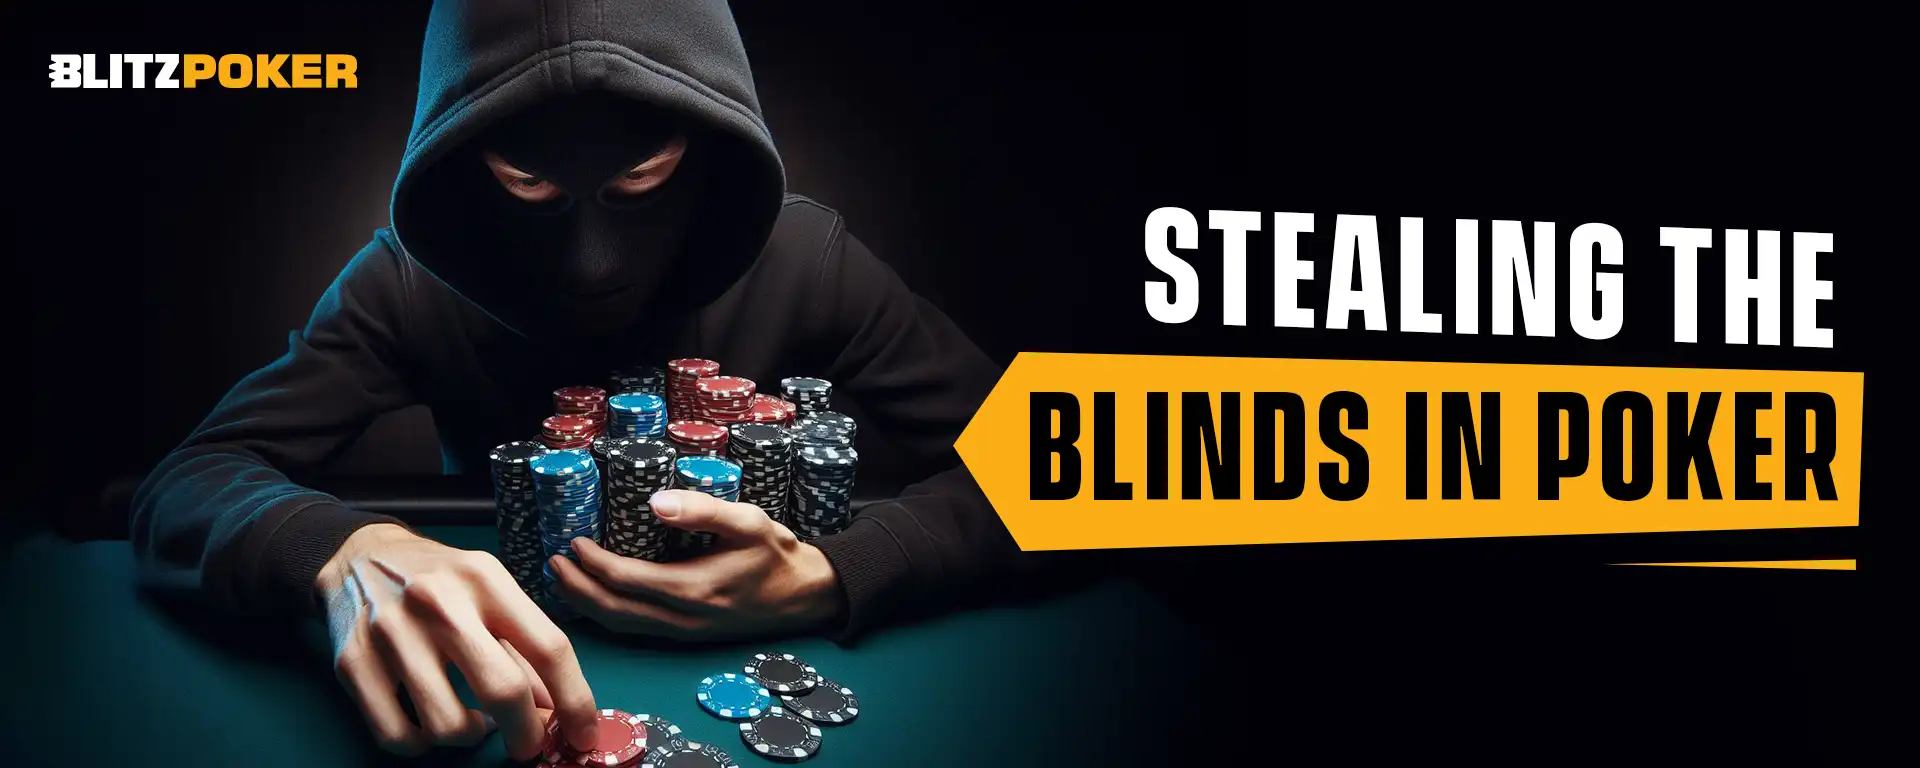 Stealing the Blinds in Poker